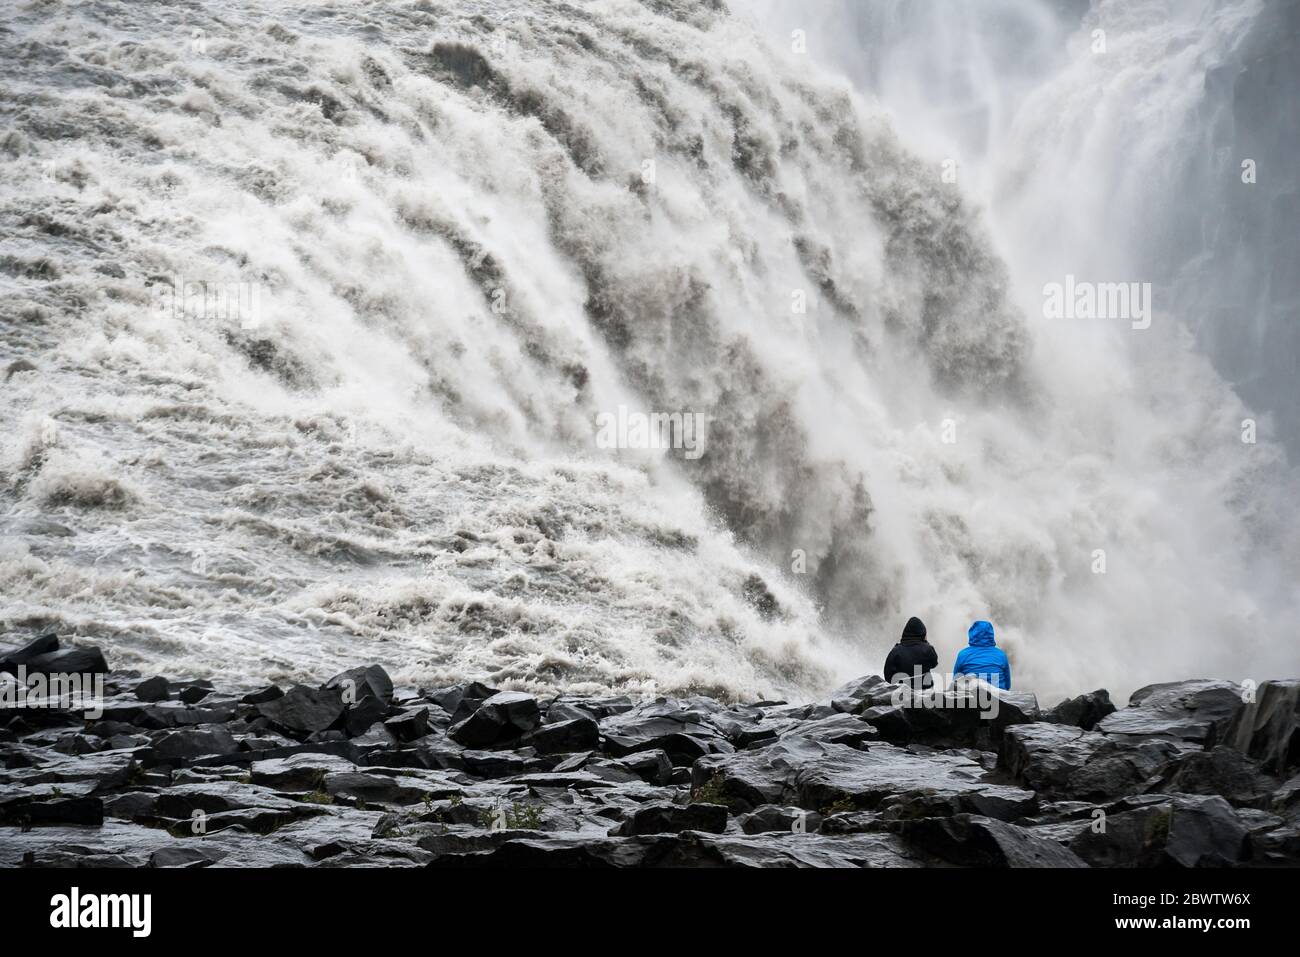 Close up of a raging icelandic waterfall with a black rocky shore in the foreground Stock Photo